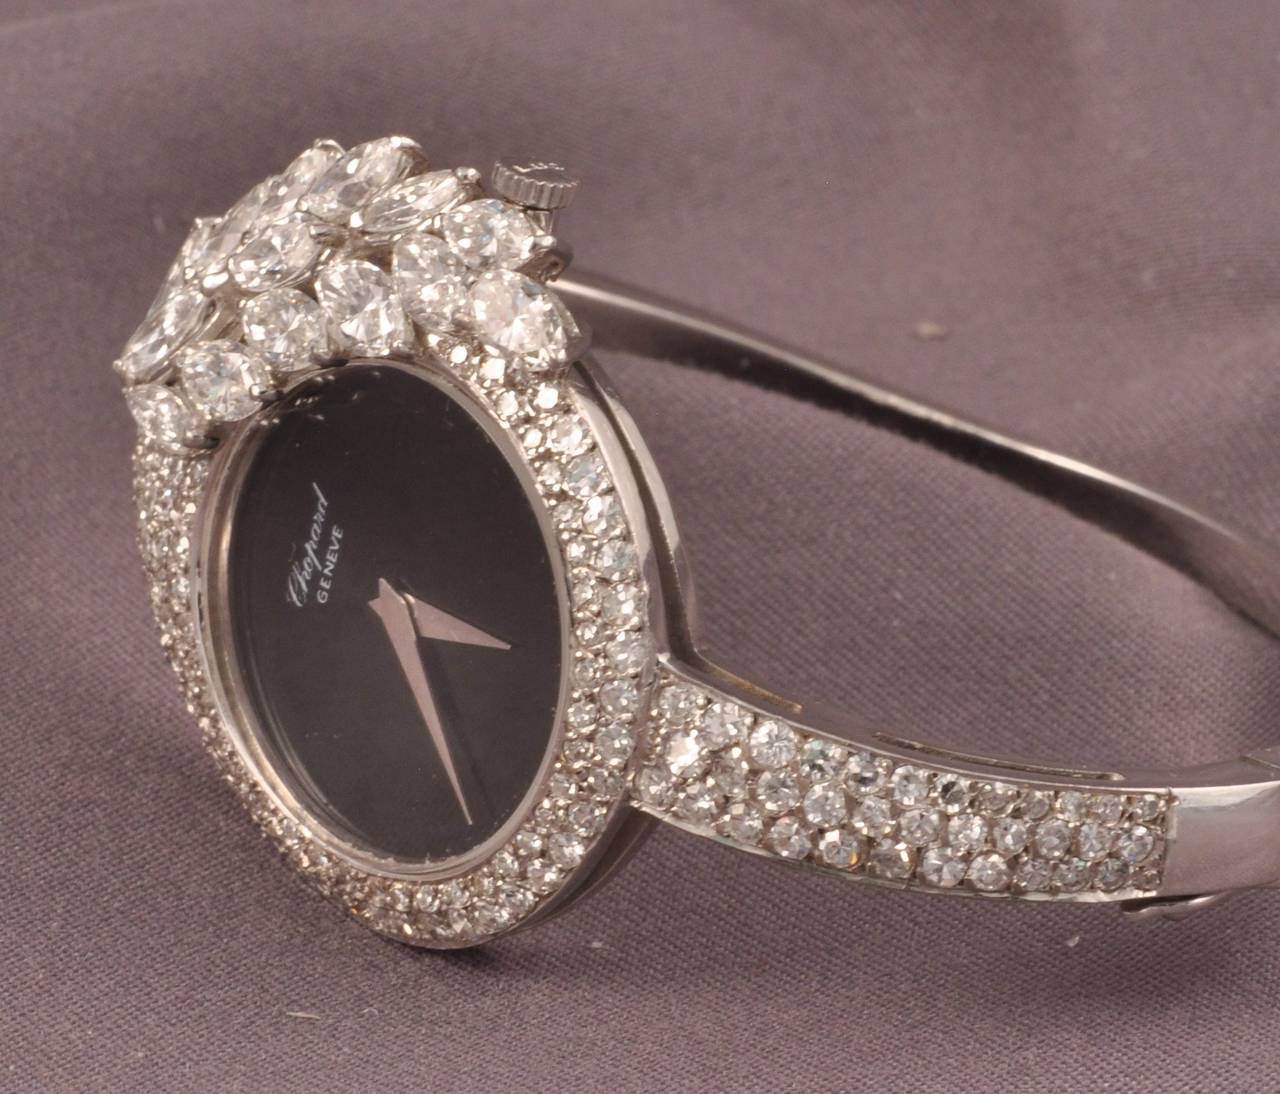 Very rare and fine lady's 18k white gold and diamond set manual winding wristwatch with onyx dial.